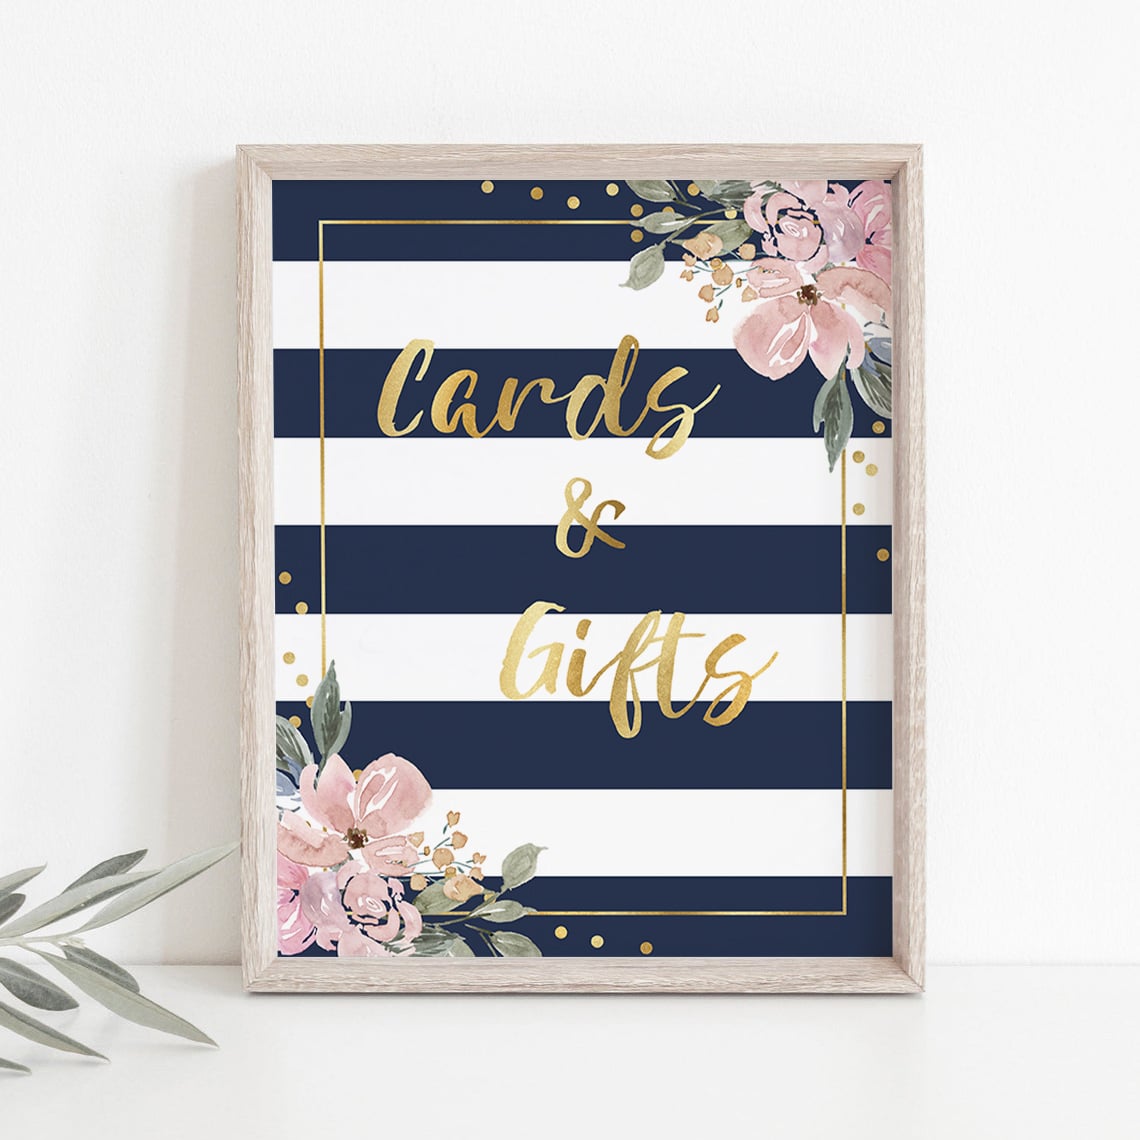 Instant download gifts sign with florals and stripes by LittleSizzle